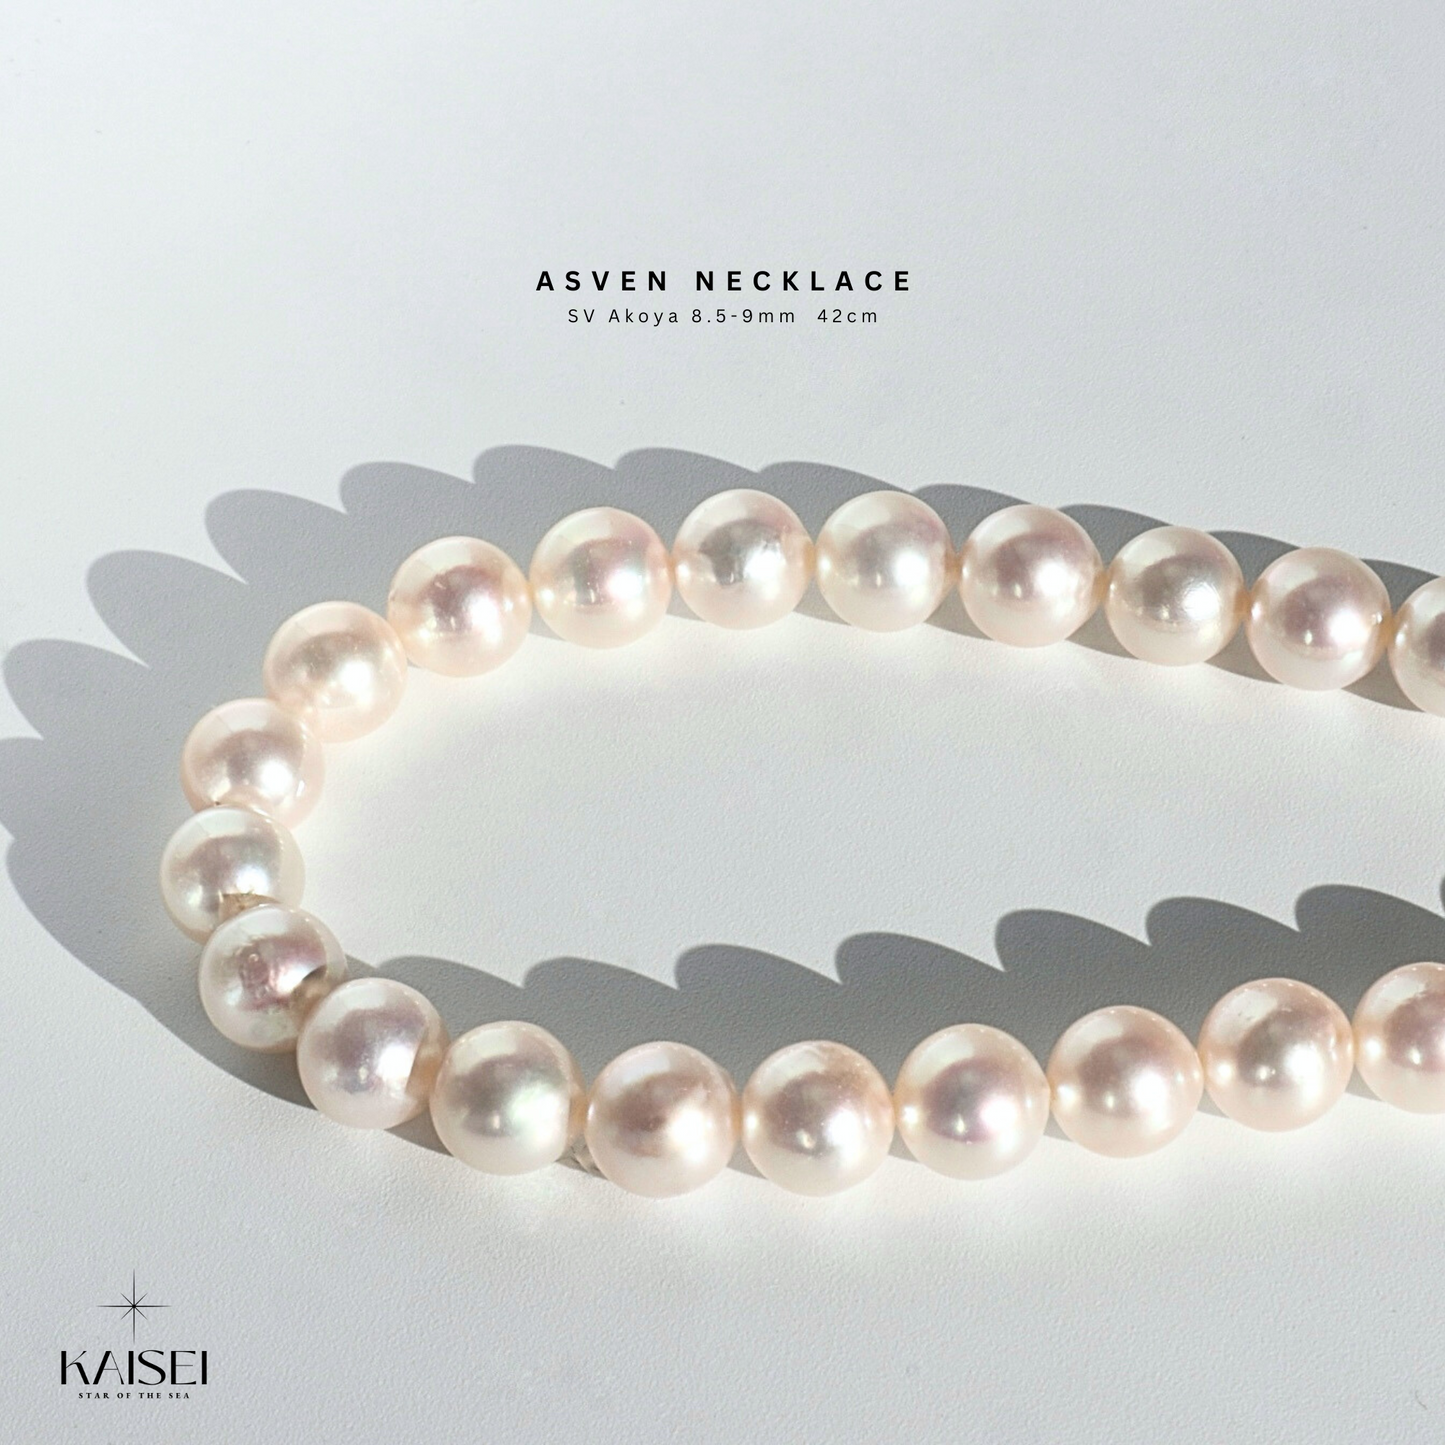 Kaisei Pearl - Asven Necklace Akoya Pearl Necklace Jewelry 8.5-9mm